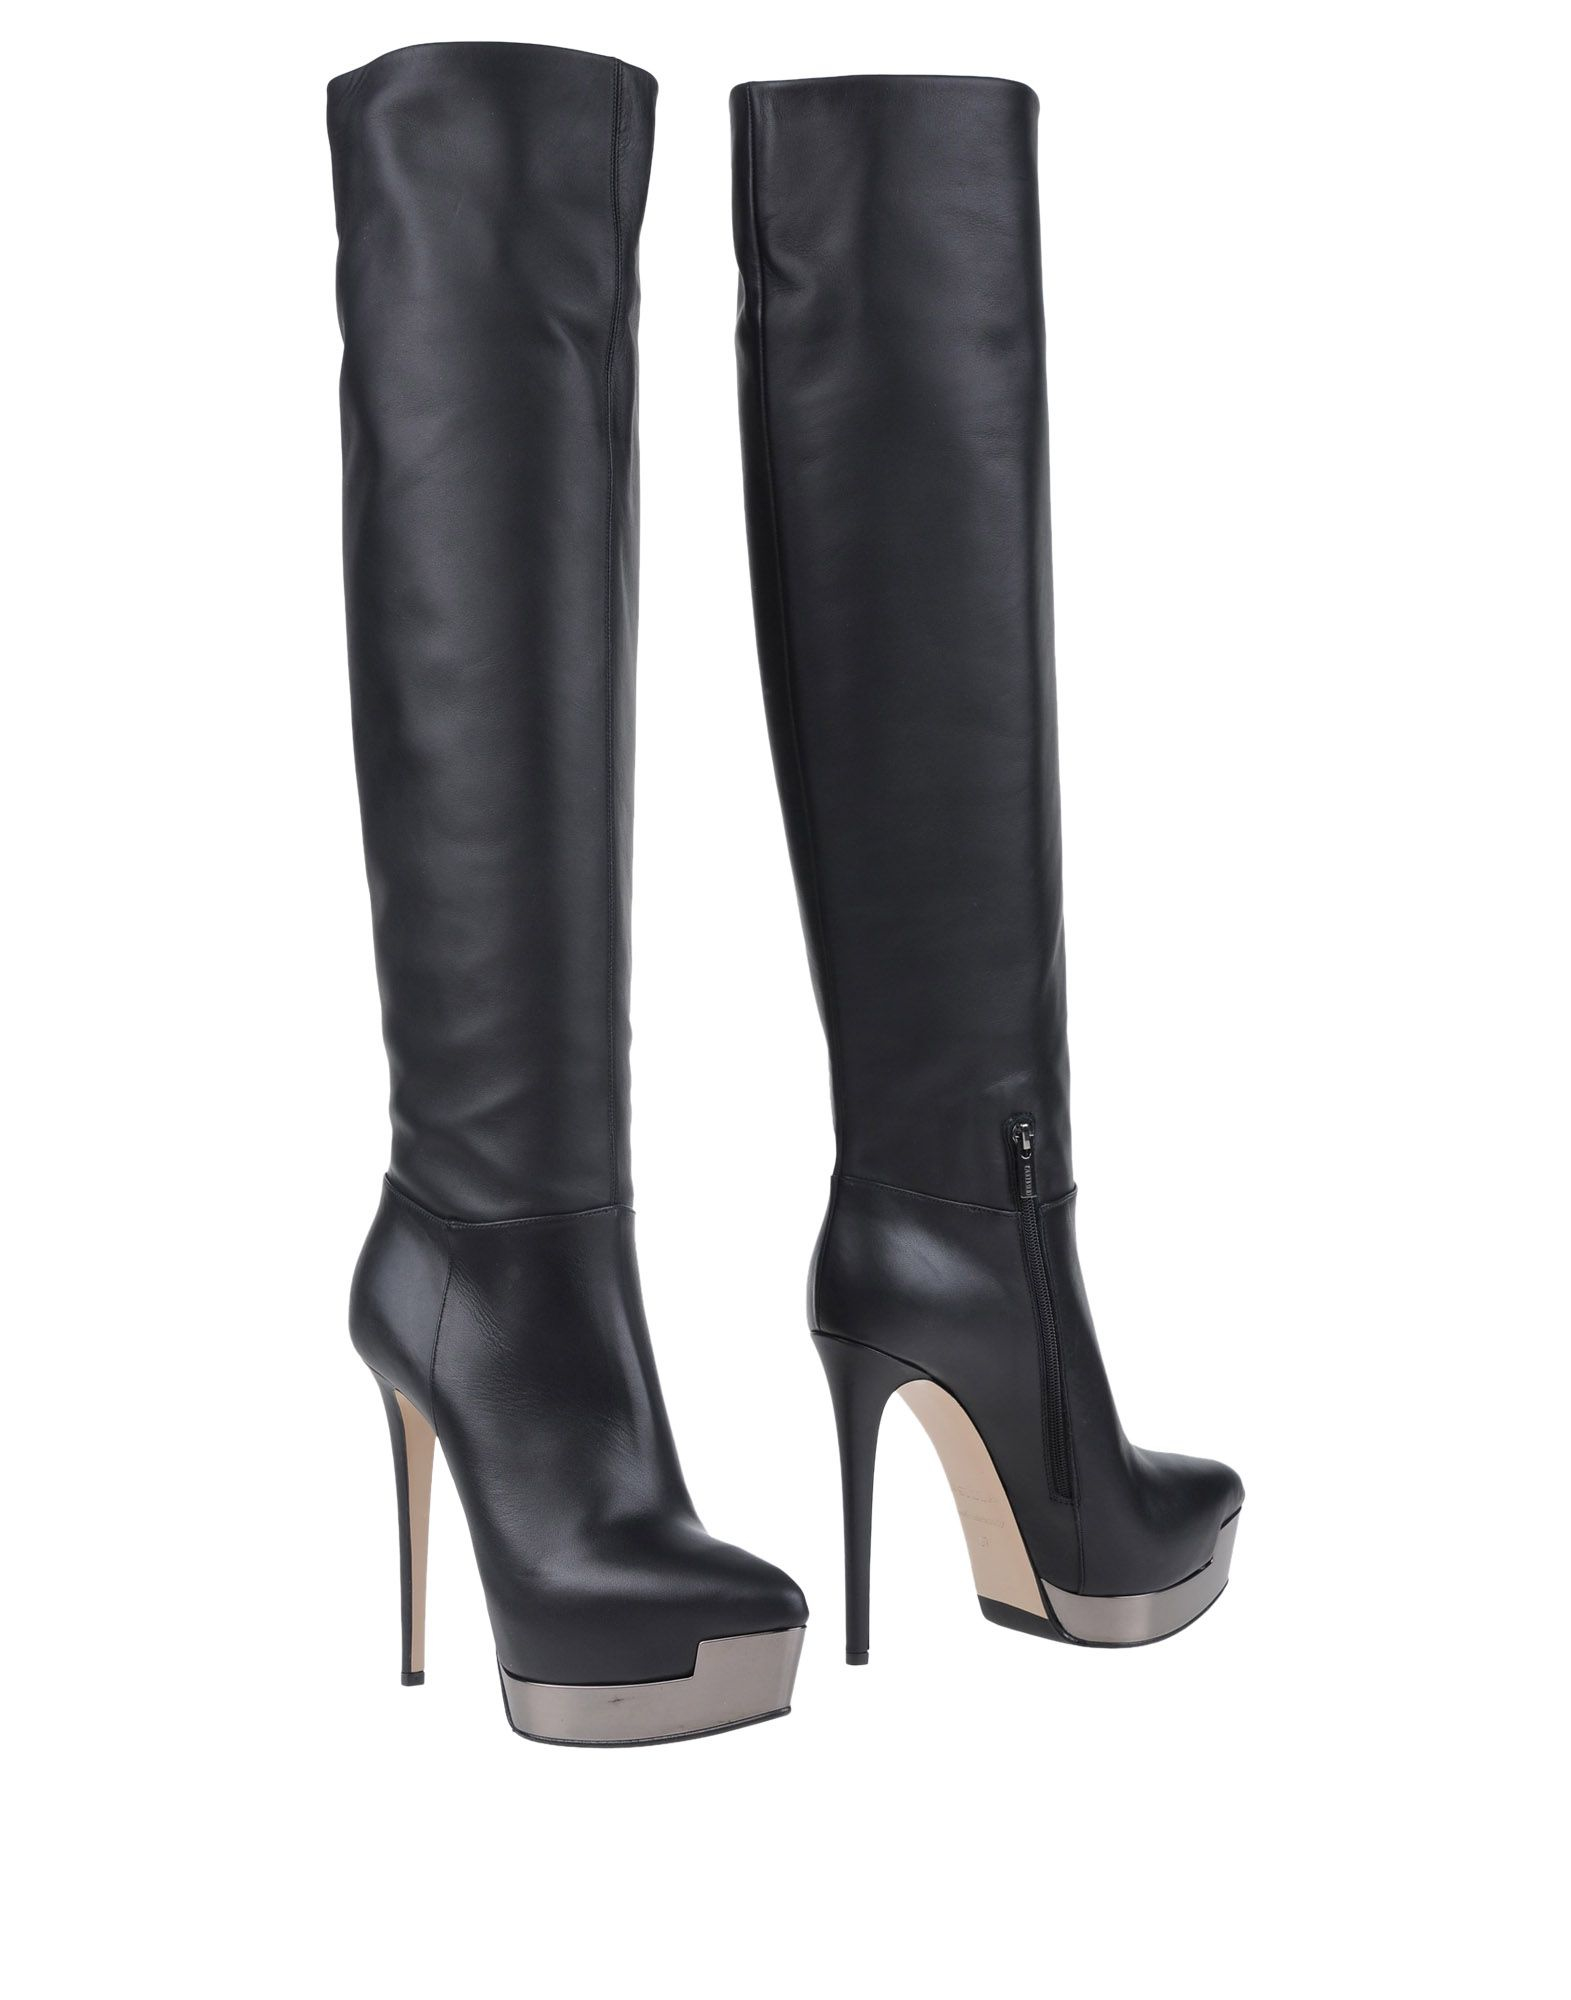 Lyst - Le Silla Boots in Black